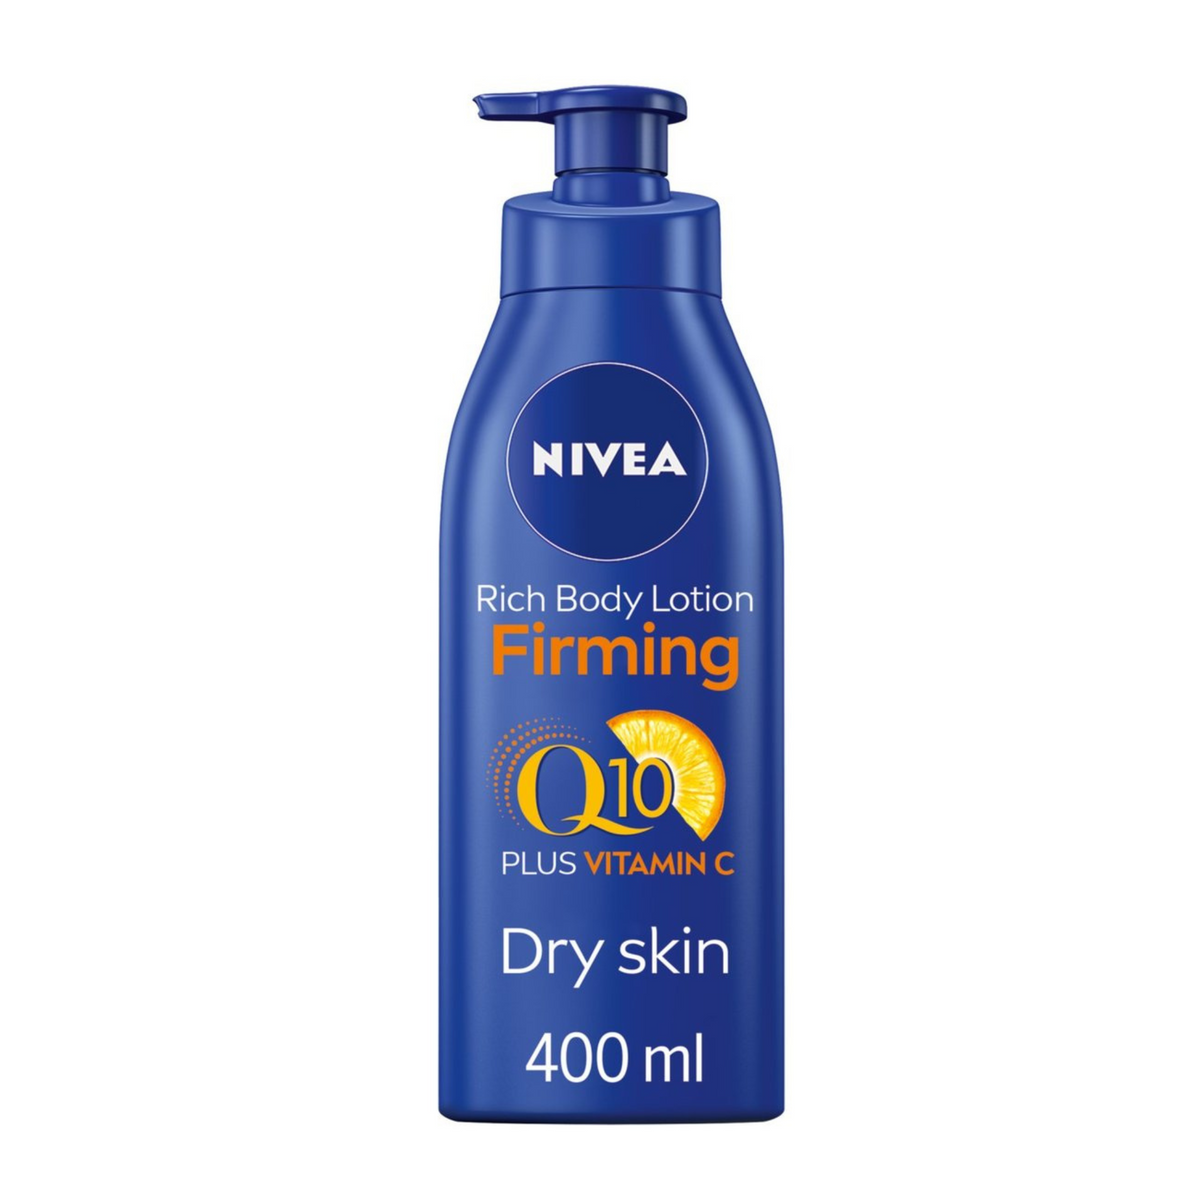 Q10 + Vitamin C Firming Body Lotion for Dry Skin